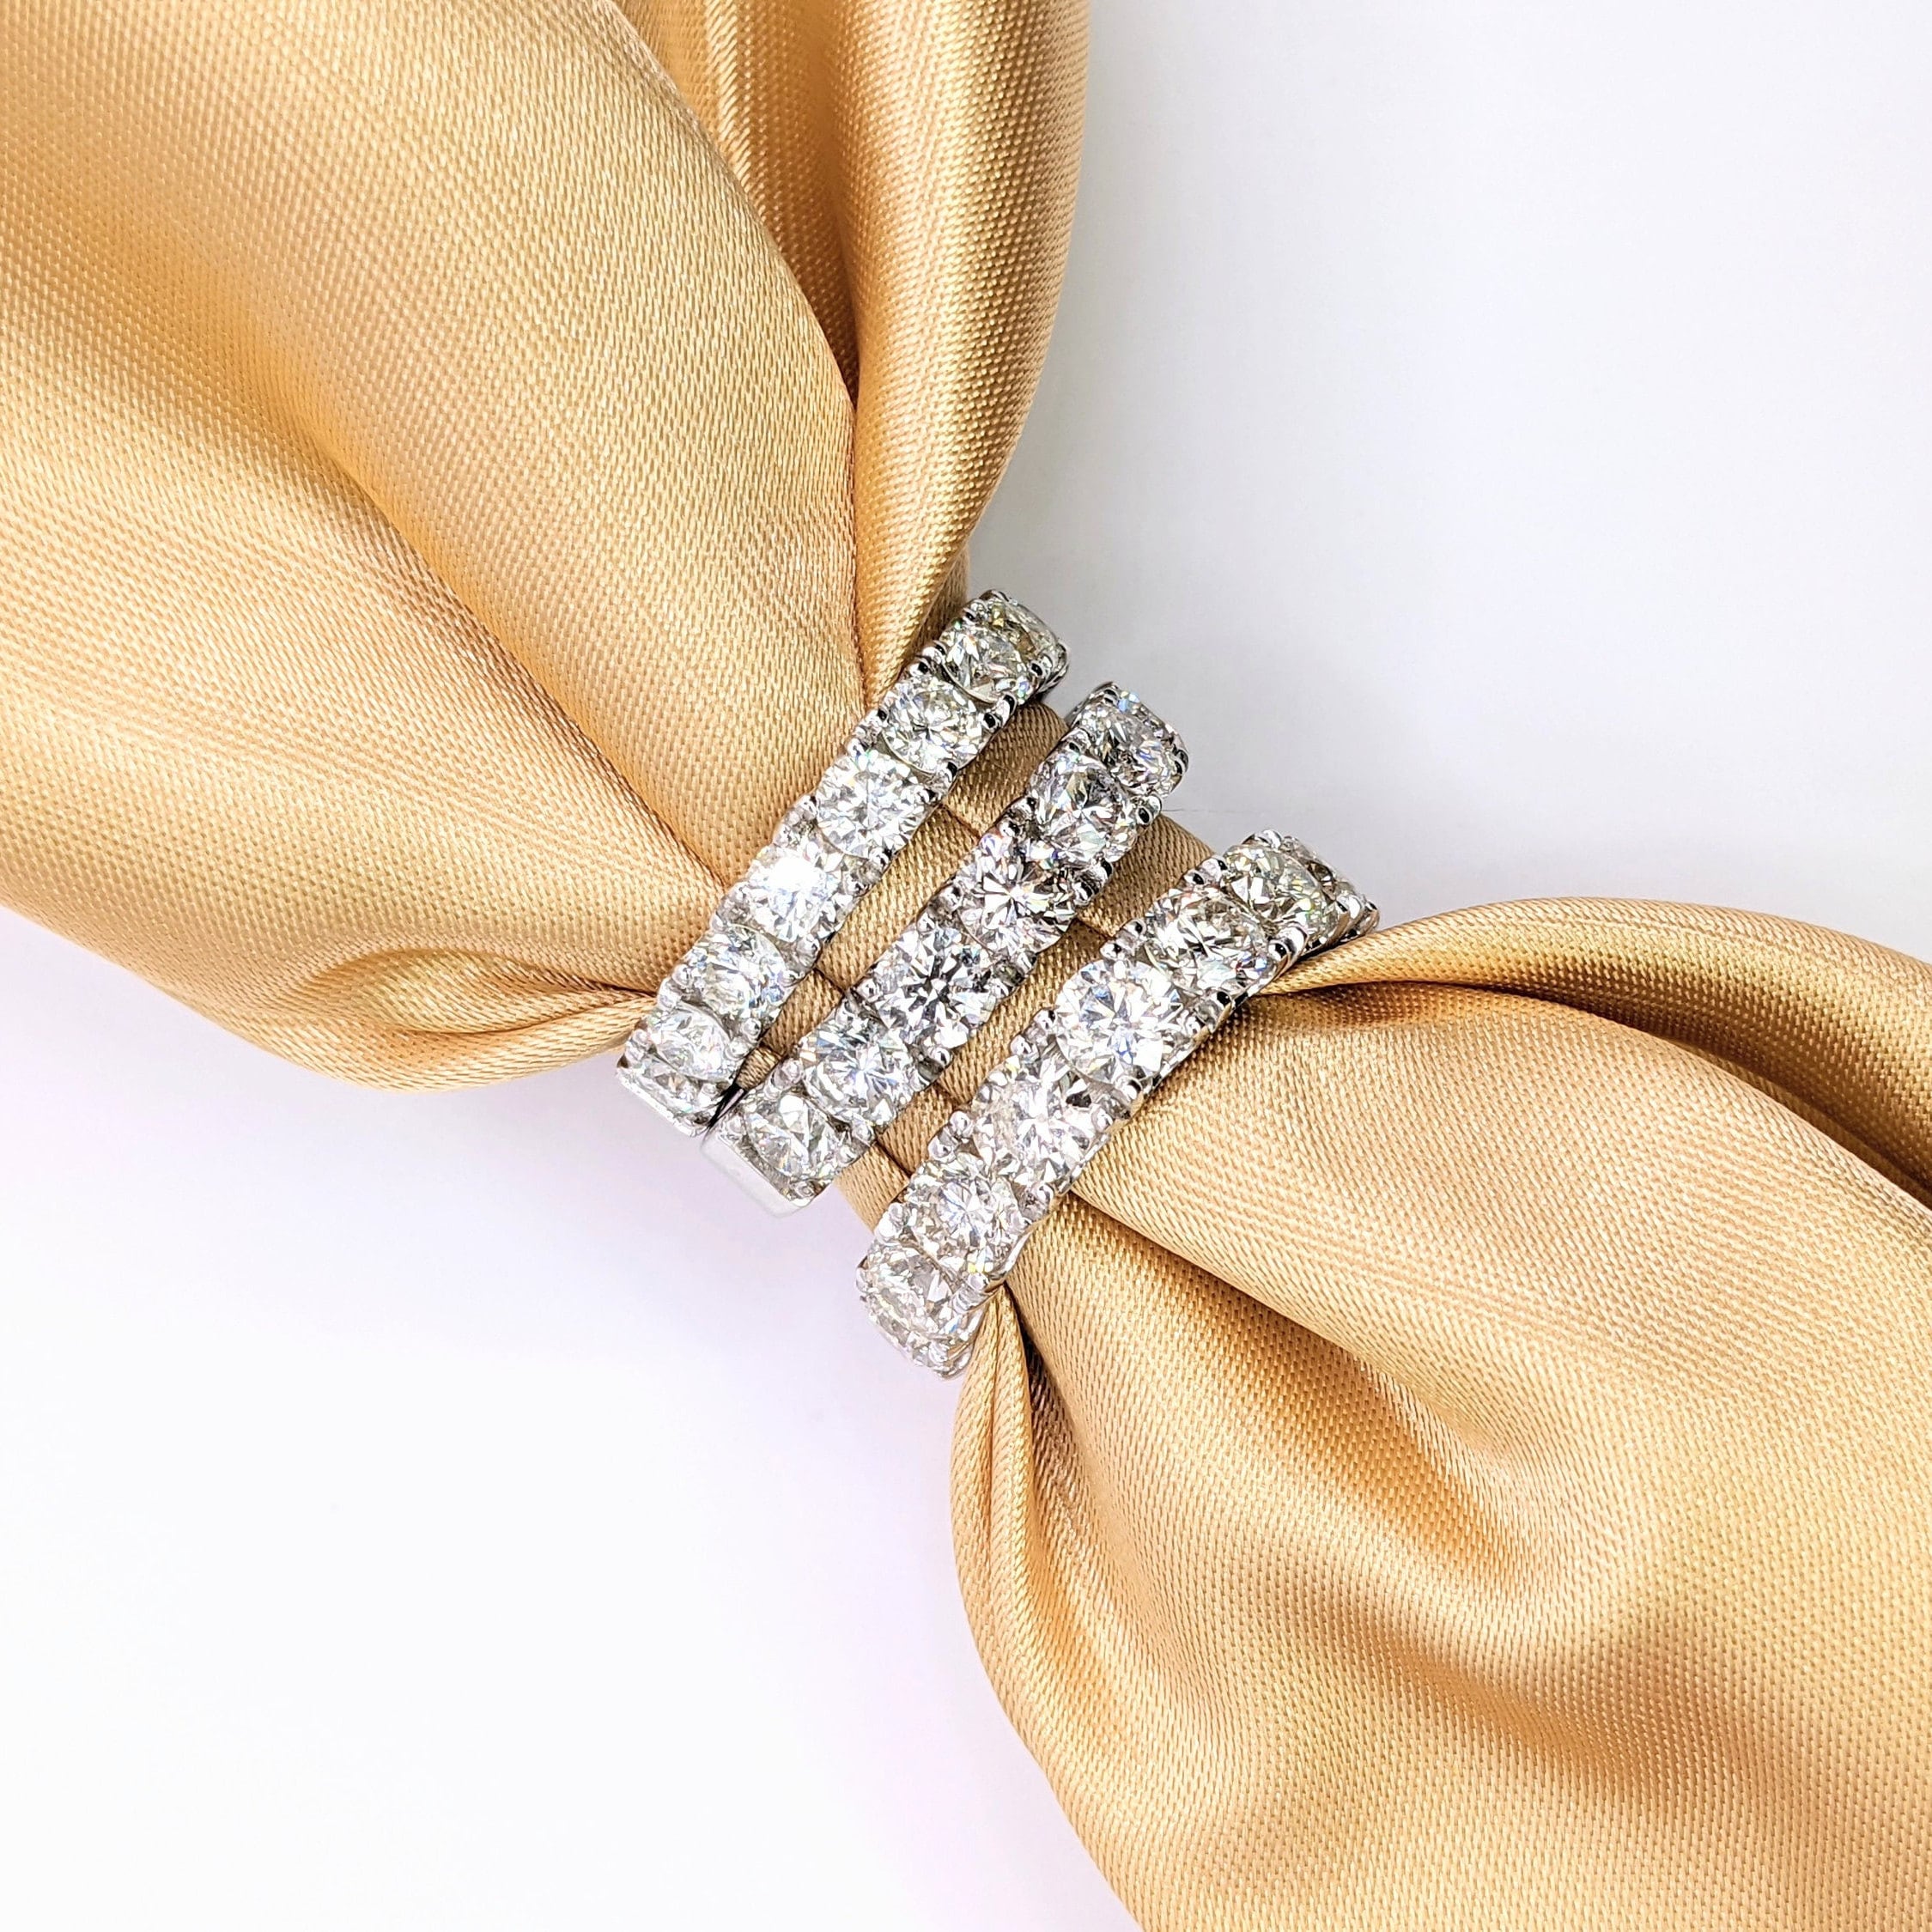 Beautiful Stacking Eternity Diamond Band | Straight Band | Wedding Band | Natural Diamonds in Solid 14k Gold | Custom Sizes | Promise Ring